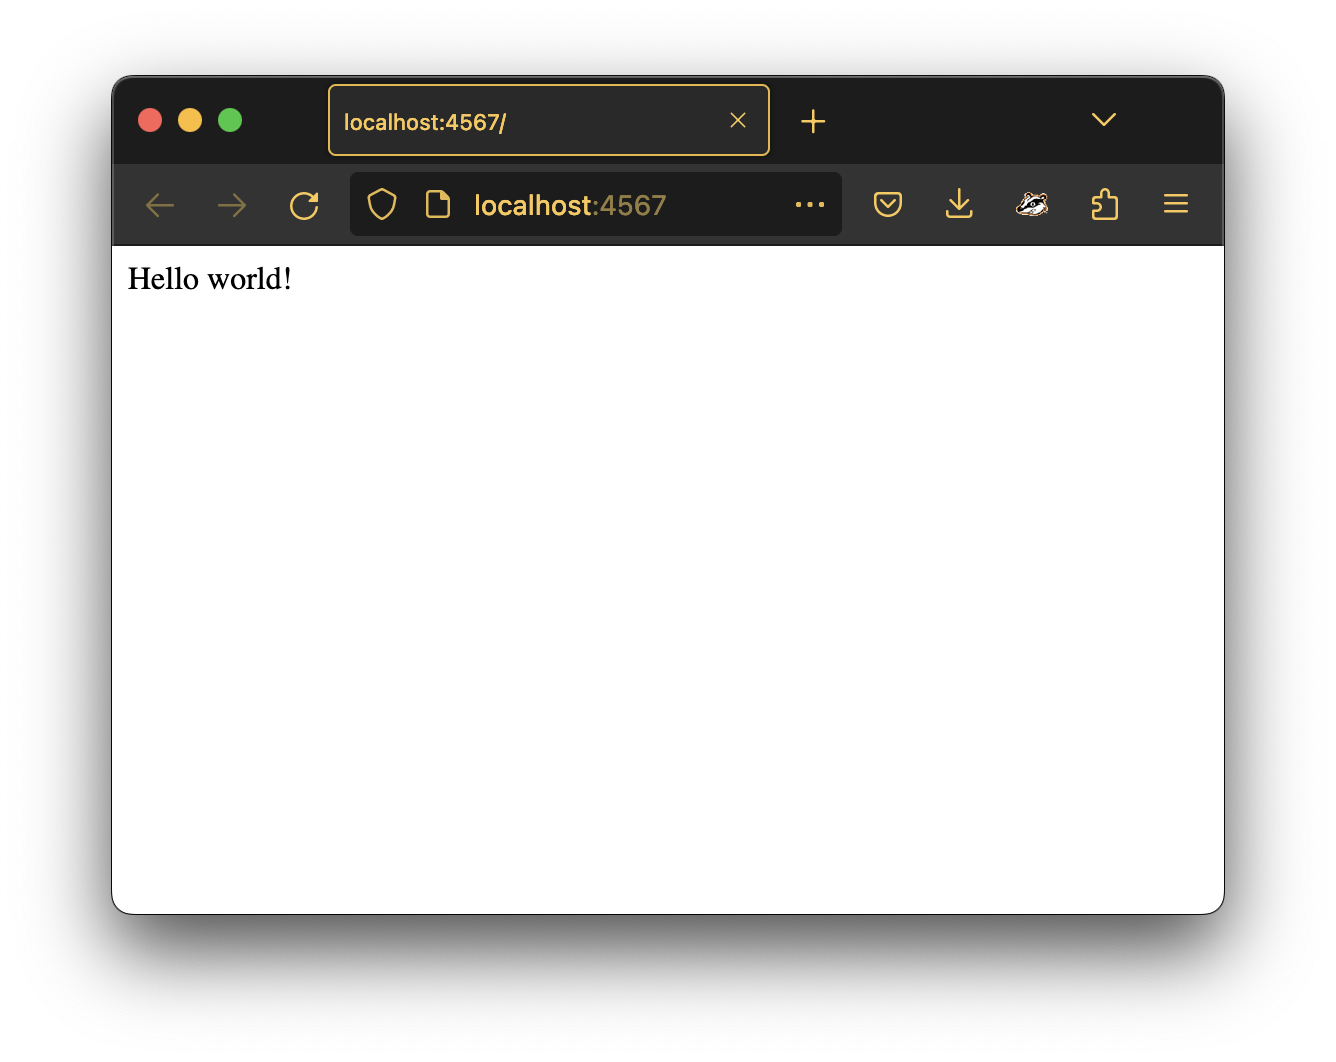 A browser window showing the text "Hello world!"